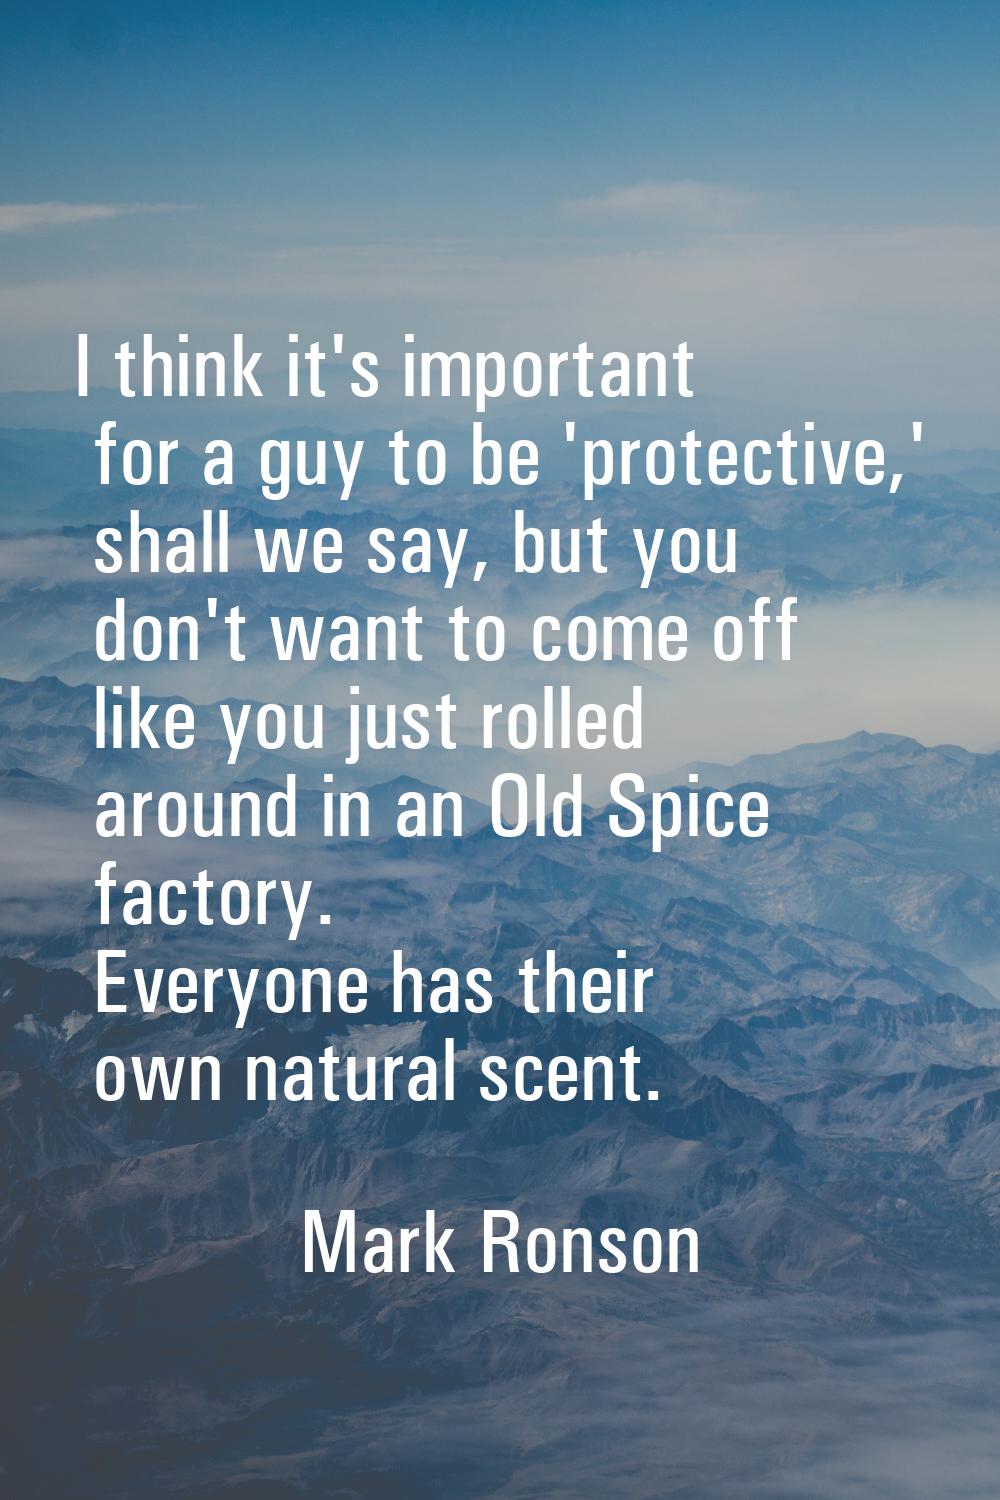 I think it's important for a guy to be 'protective,' shall we say, but you don't want to come off l